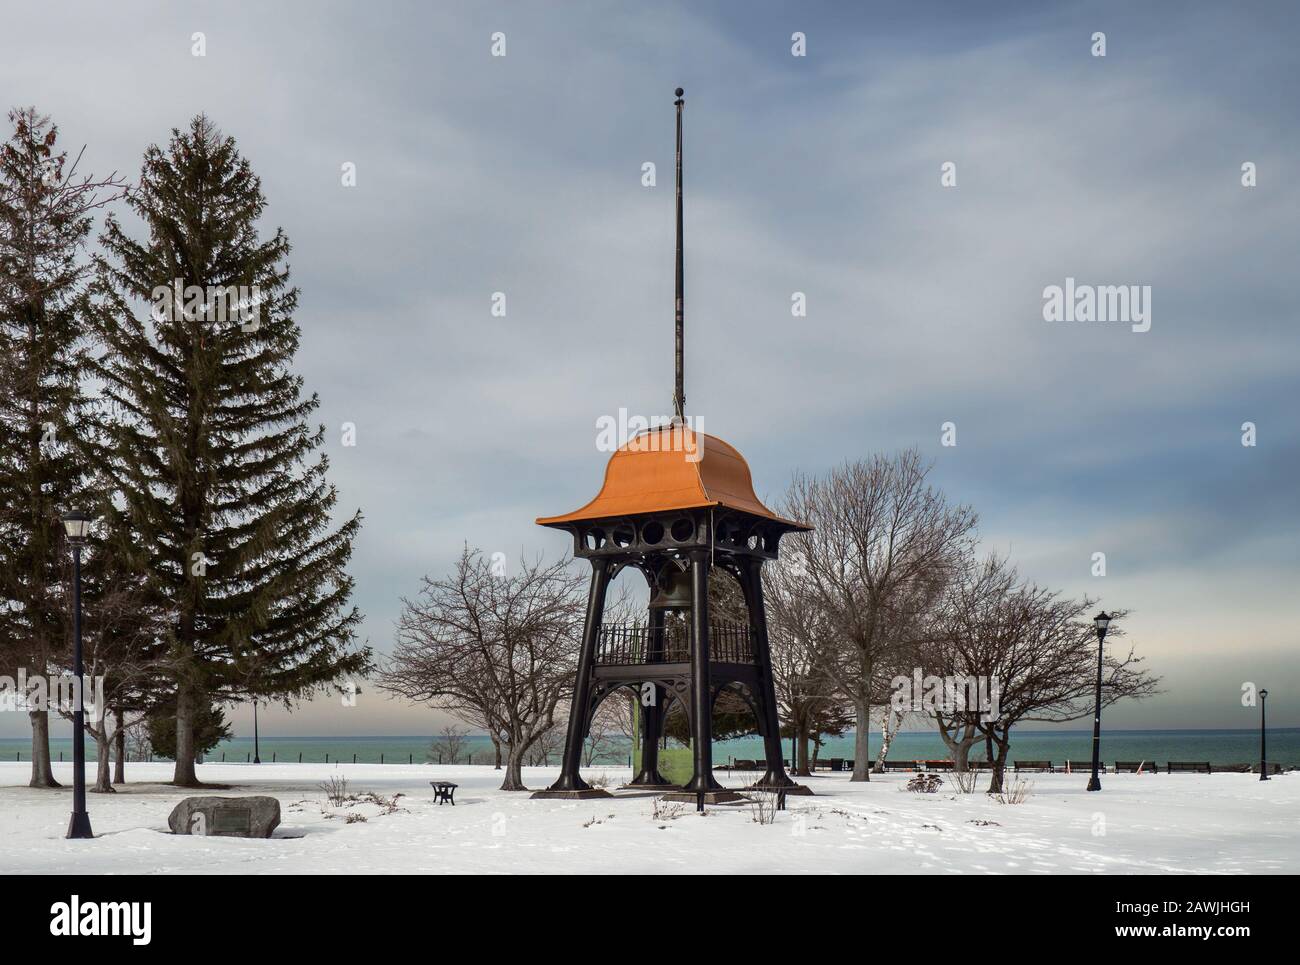 Oswego, New York, USA. January 23, 2020. The Kingsford Bell in Breitbeck Park in honor of the Kingsford family who built mant properties and were prom Stock Photo